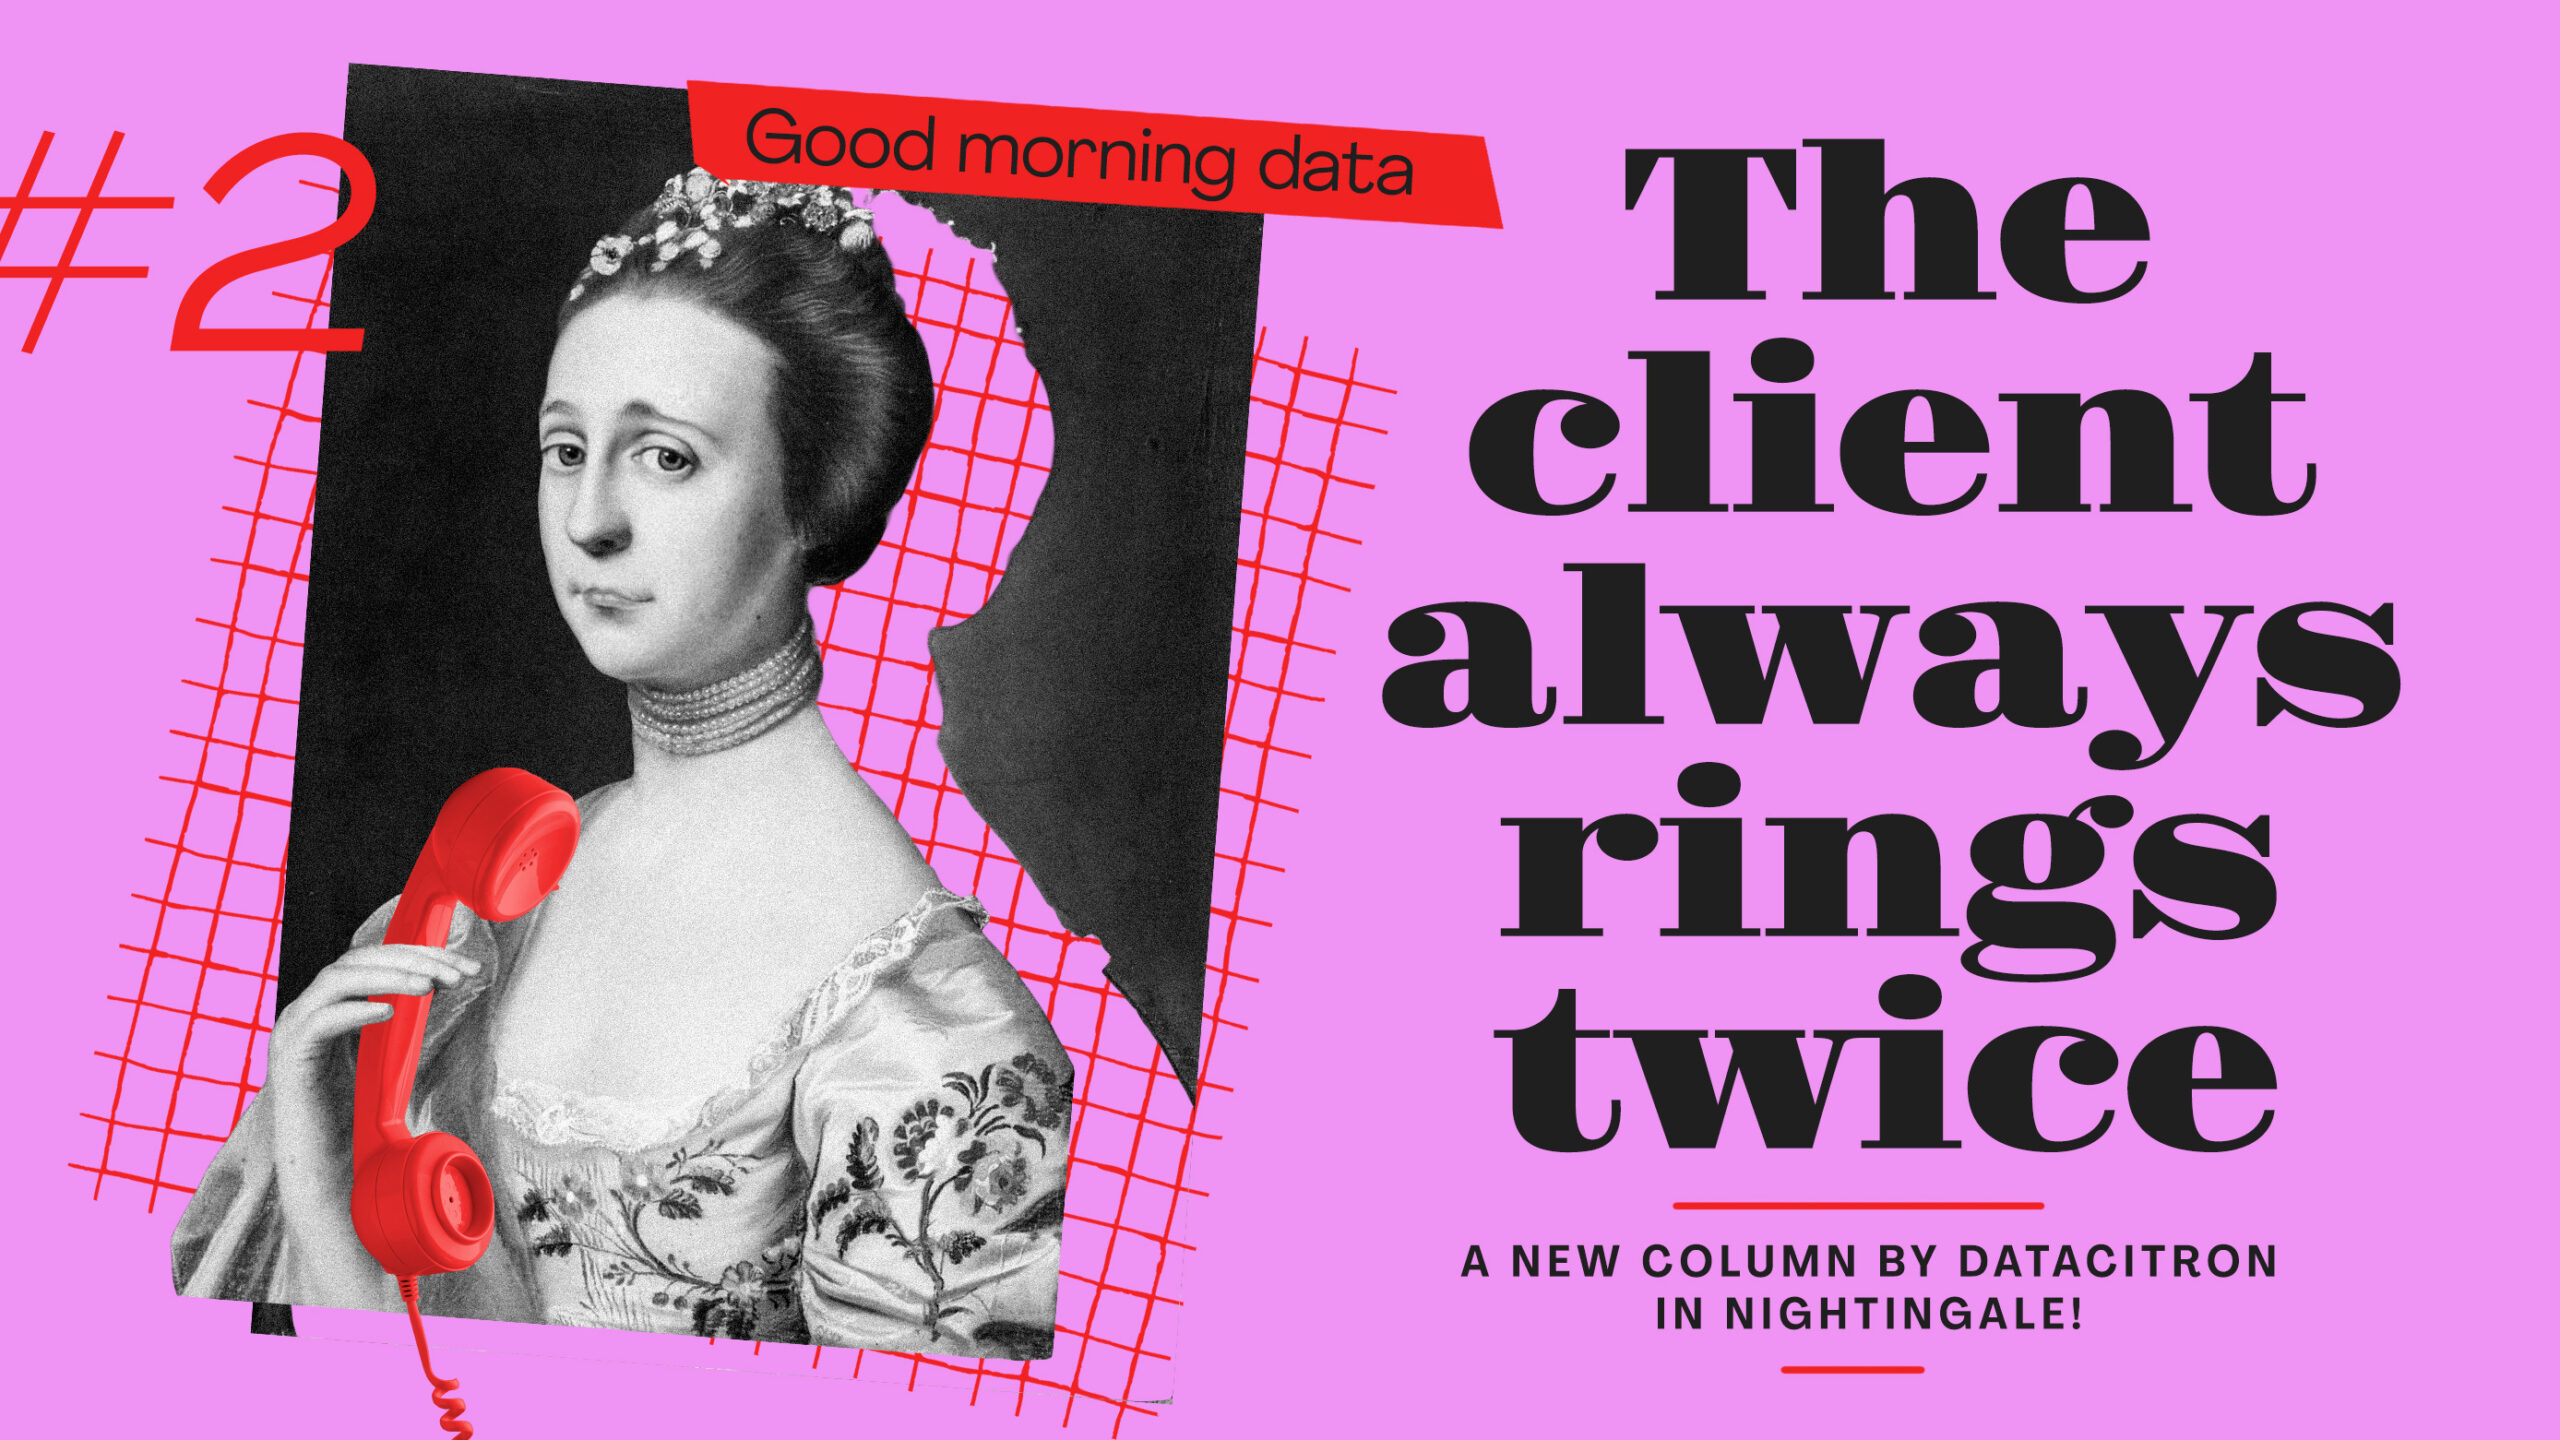 Digital cover image for 'Good Morning Data' column #2, featuring the title 'The client always rings twice.' The design includes a vintage black and white portrait of a woman holding a red telephone, set against a bright pink background with red grid lines. The text on the right reads 'A new column by Datacitron in Nightingale!' in bold, black font.